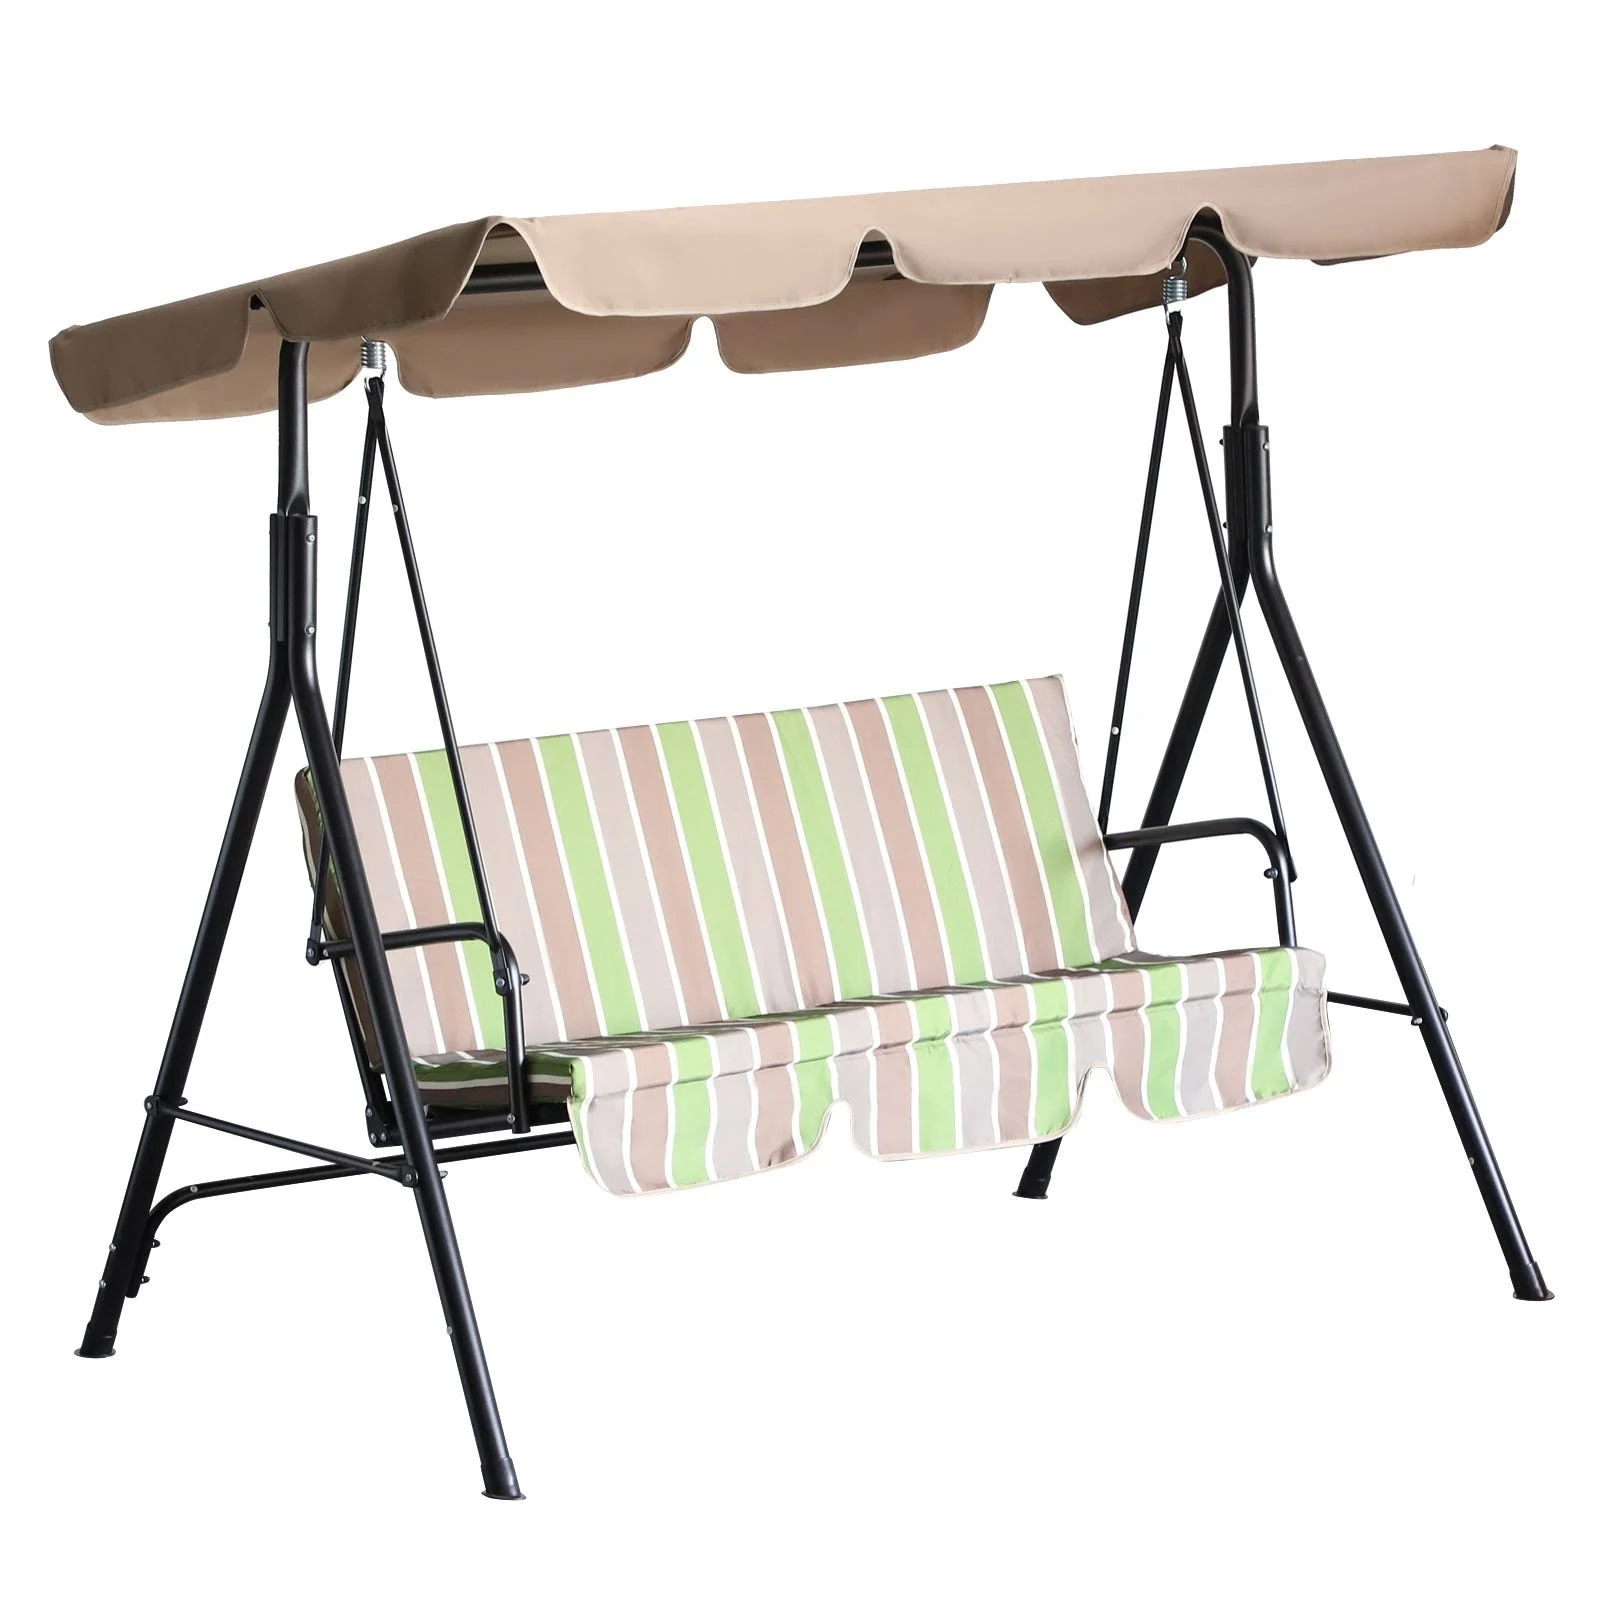 Outsunny Steel Outdoor Porch Swing Lounge Chair 3 Person with Top Canopy